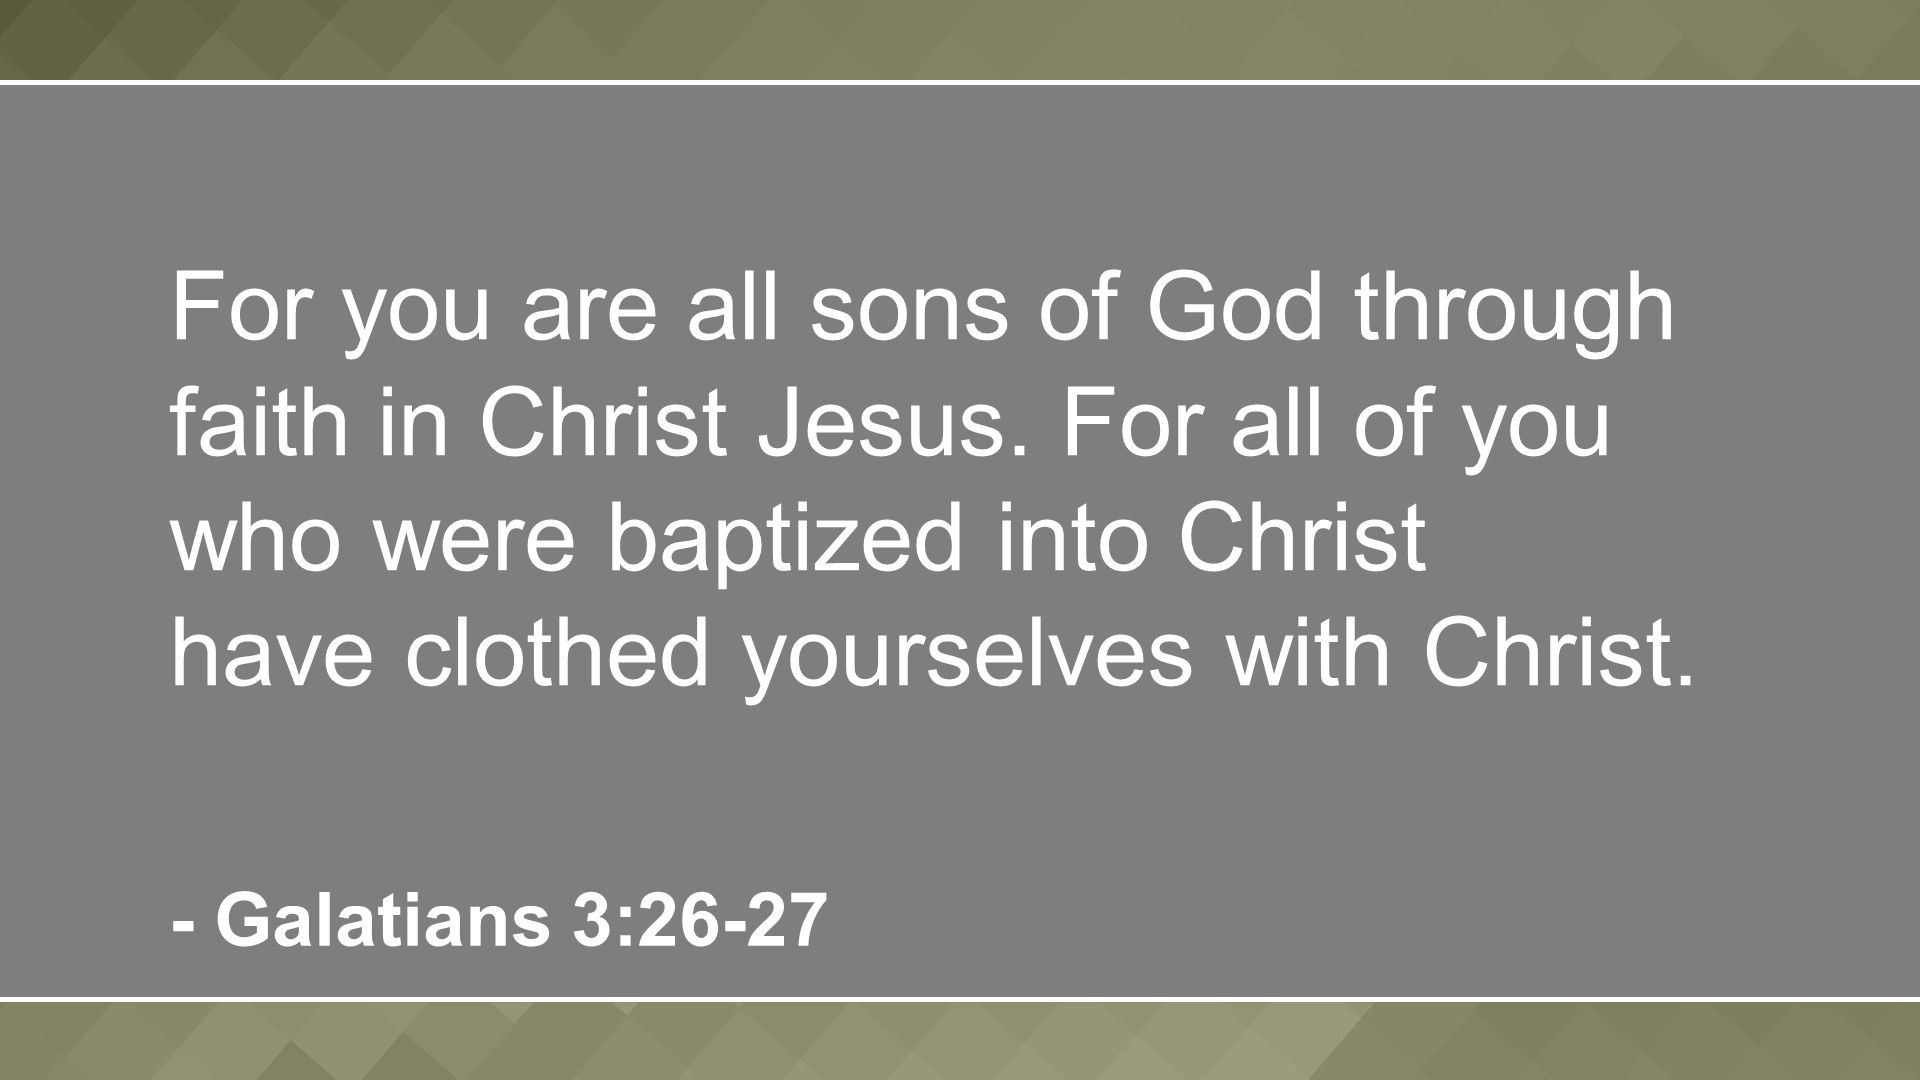 For you are all sons of God through faith in Christ Jesus.